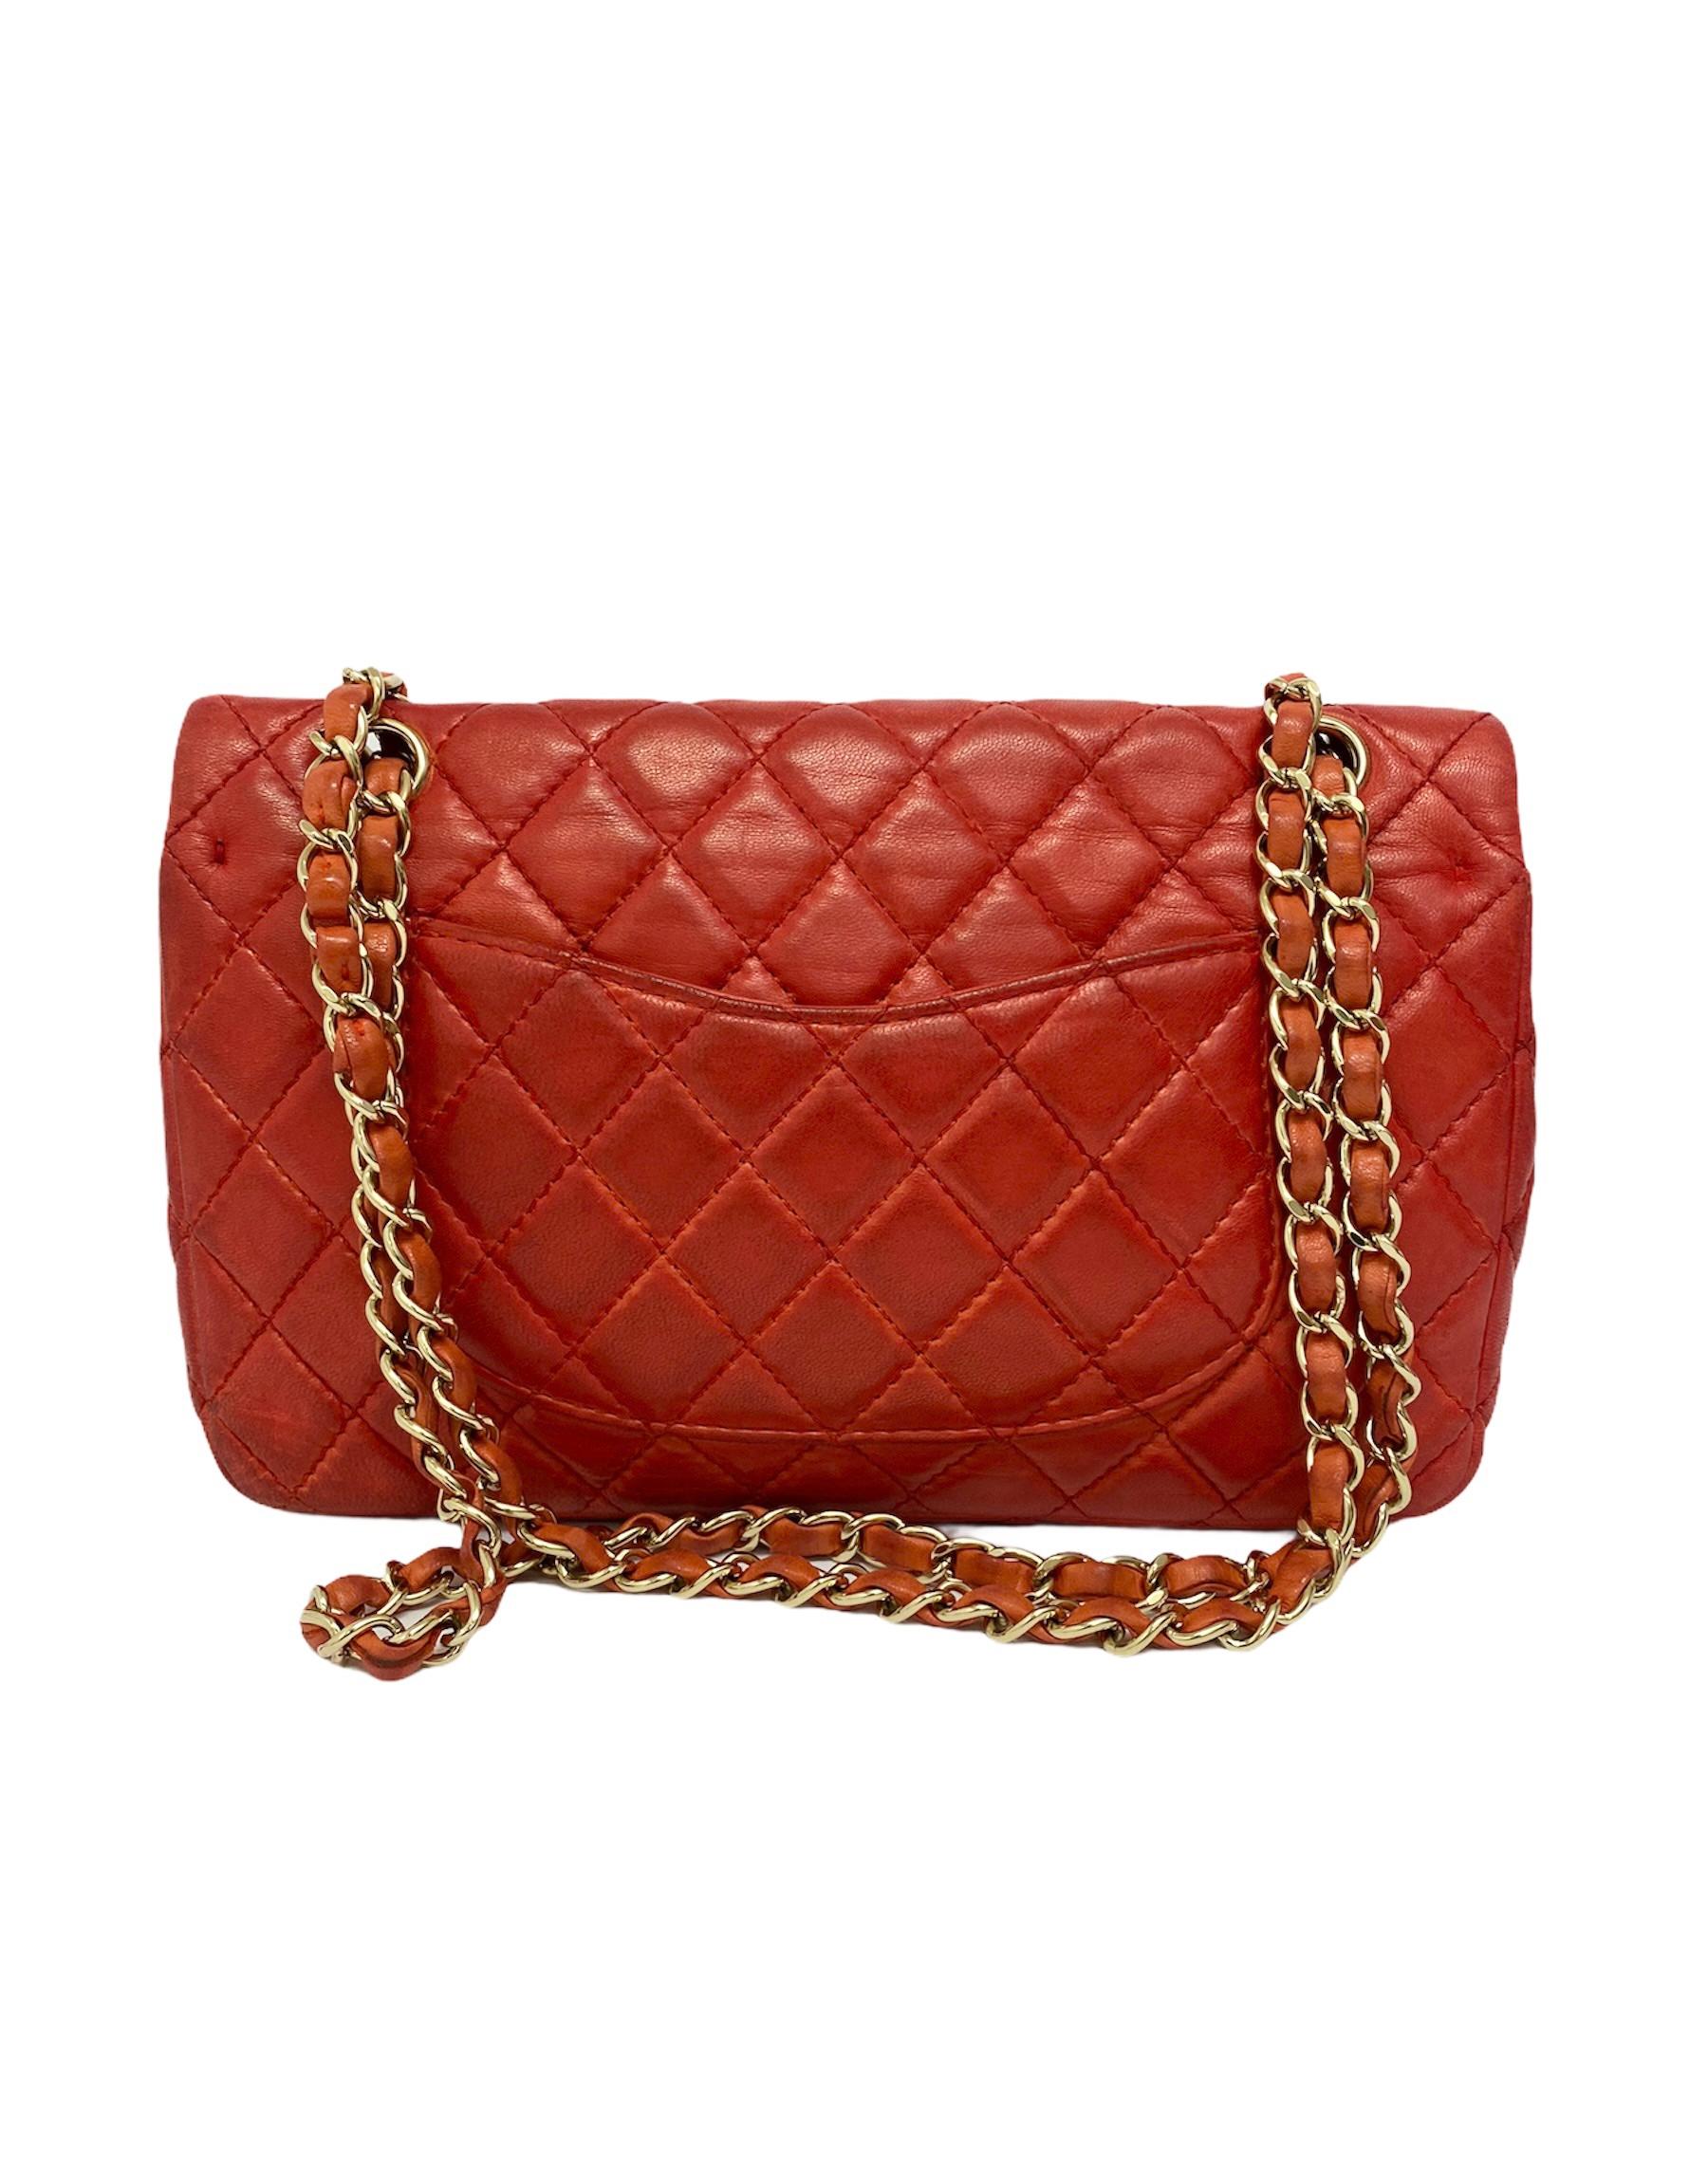 Chanel 2.55 Red Leather with Golden Hardware 6